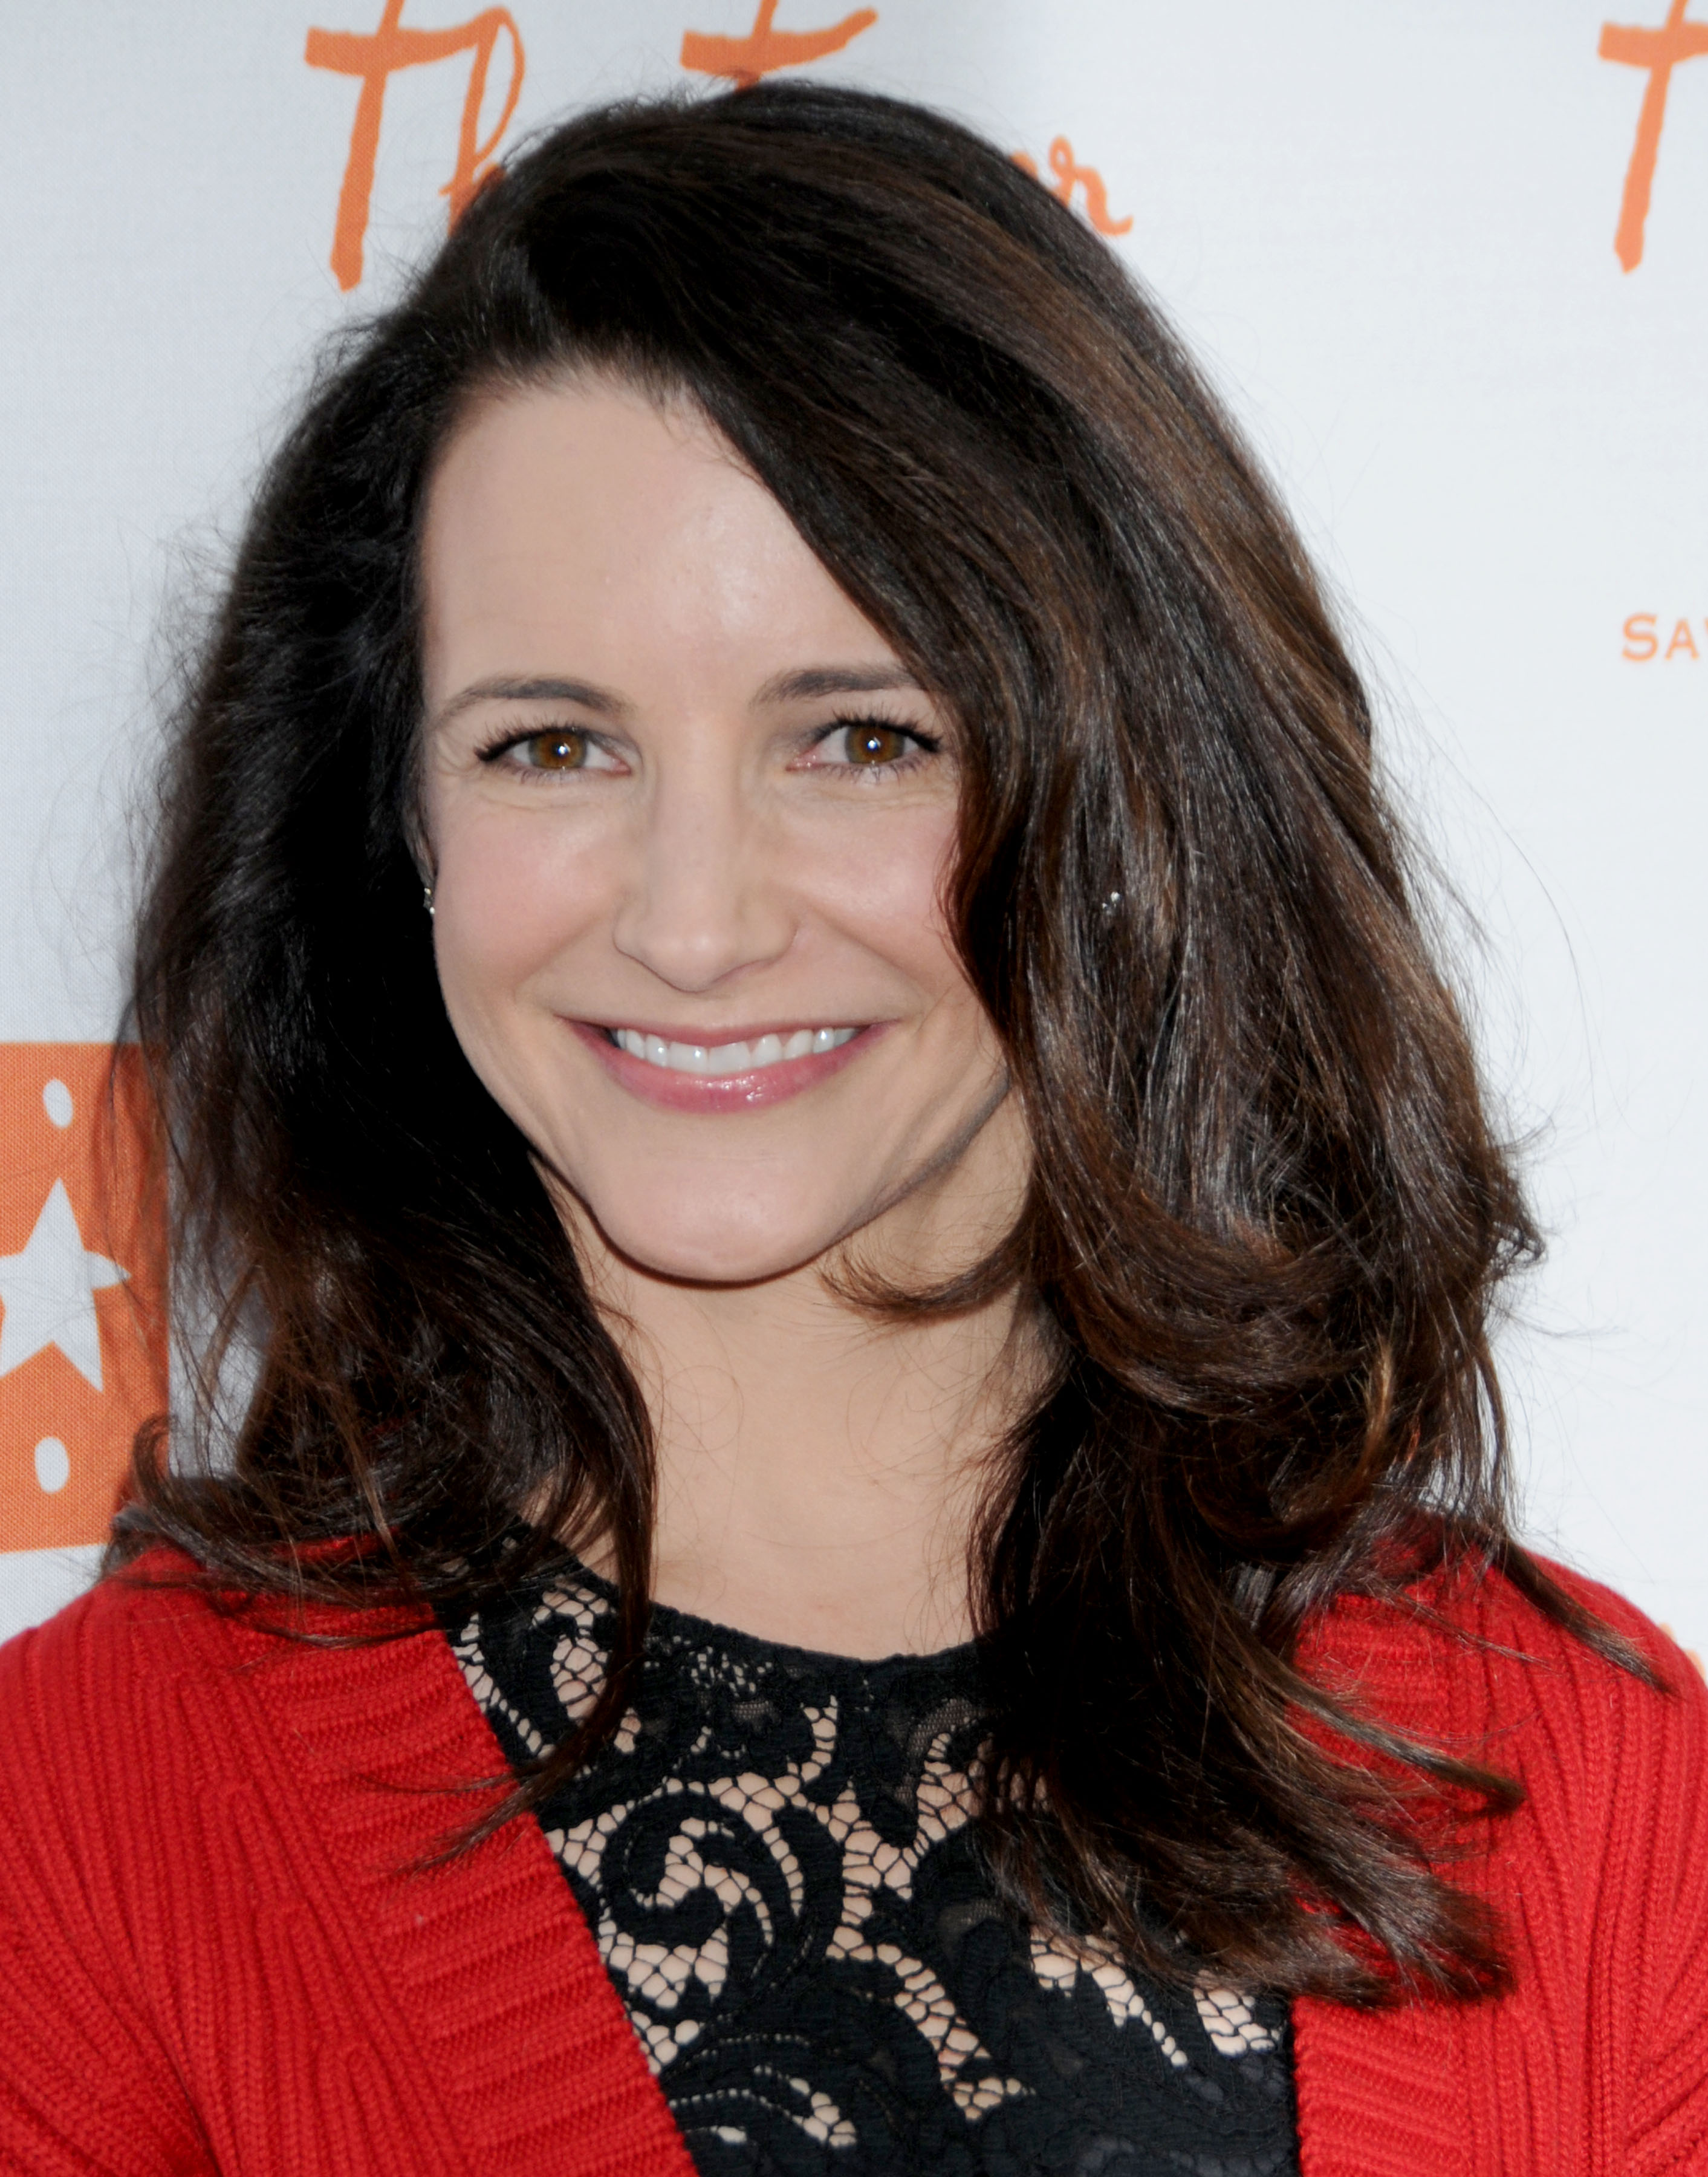 Kristin Davis at the "Trevor Live" annual show on December 5, 2010 in Hollywood, California. | Source: Getty Images